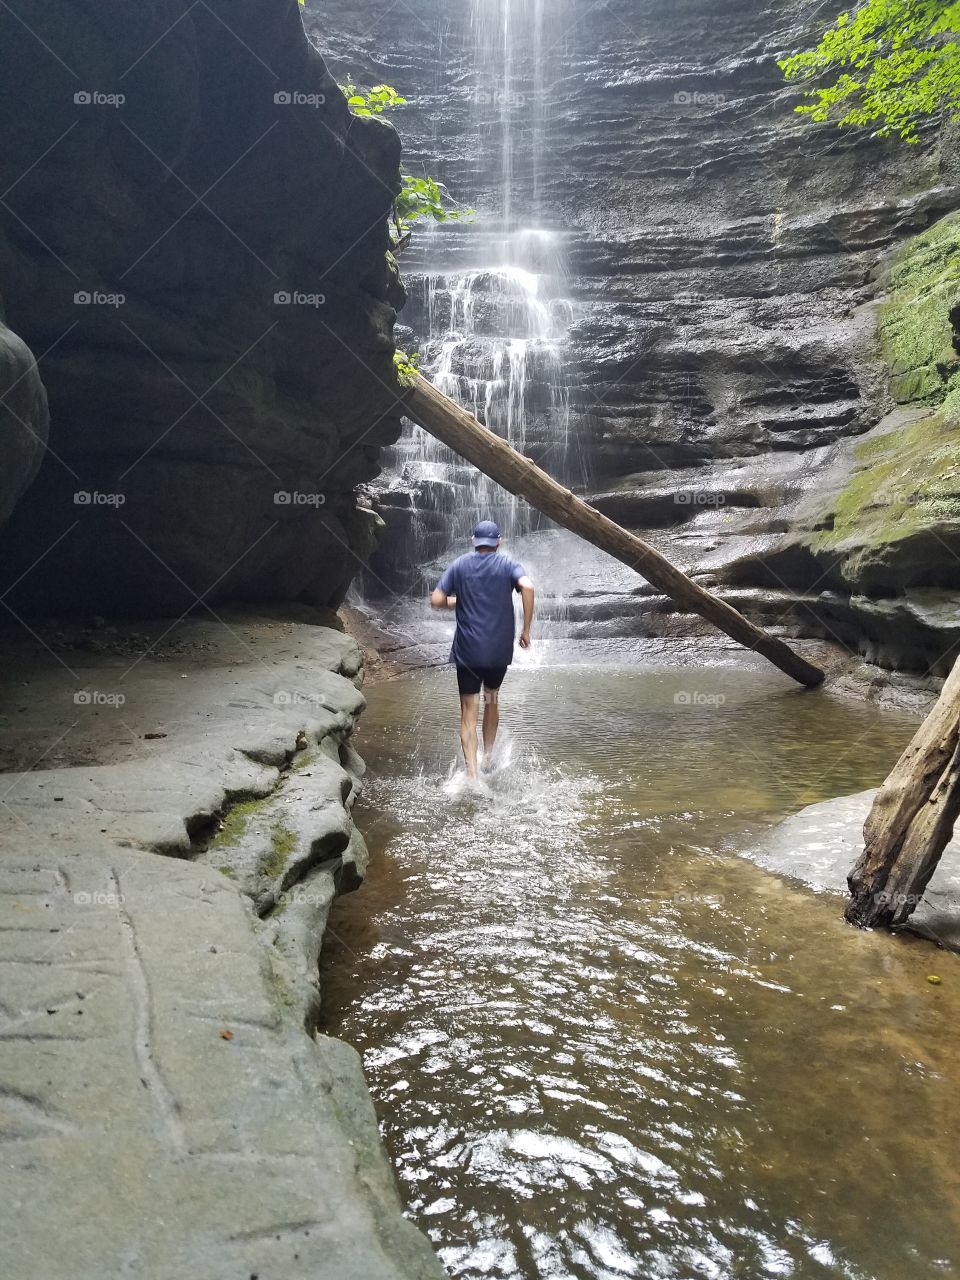 trail running in stream at waterfall